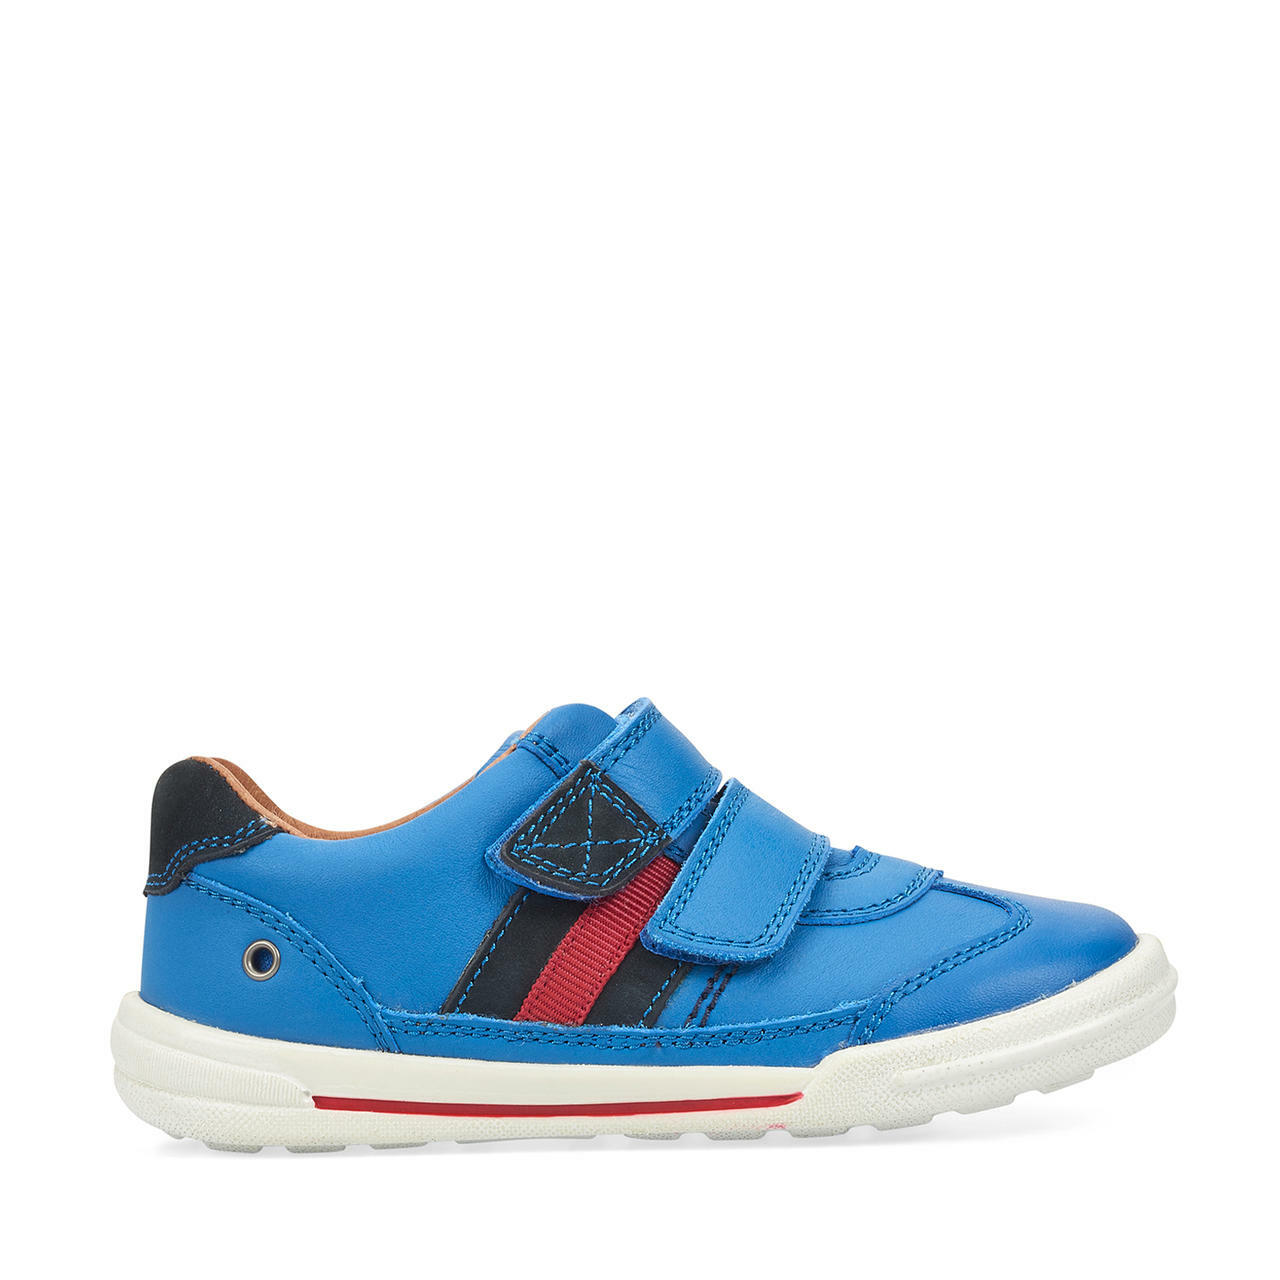 A boys casual shoe by Start Rite, style Seesaw, in blue and red leather with double velcro fastening. Right side view.